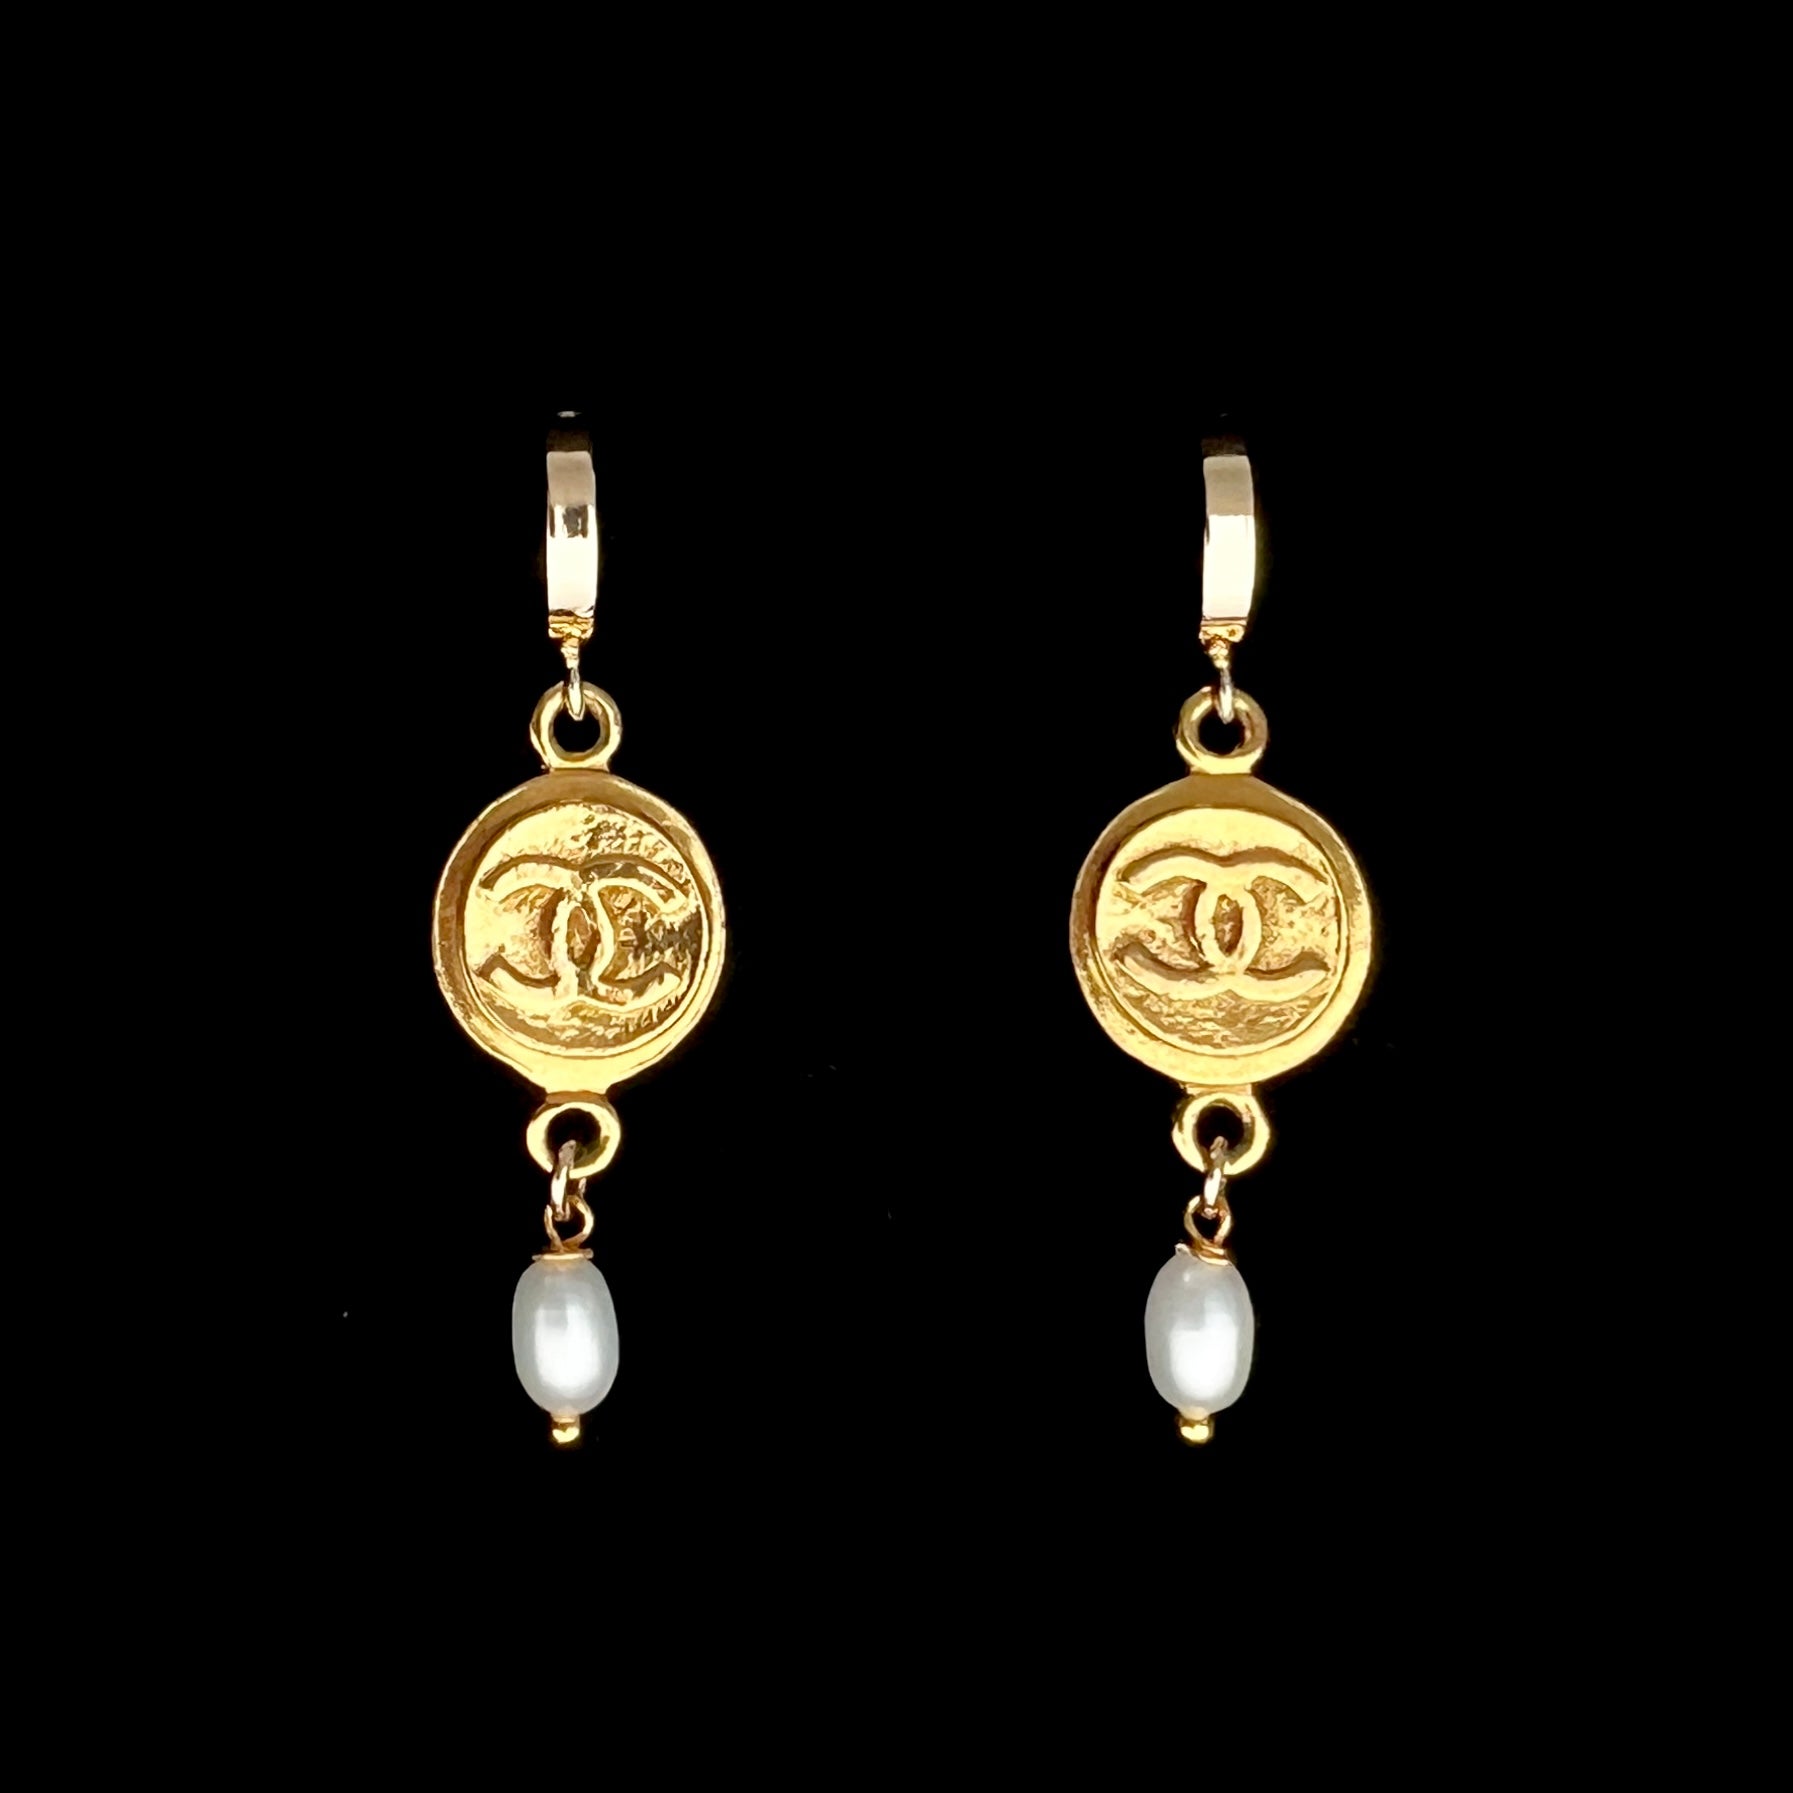 Gold Medallion Earrings with Pearl Drop